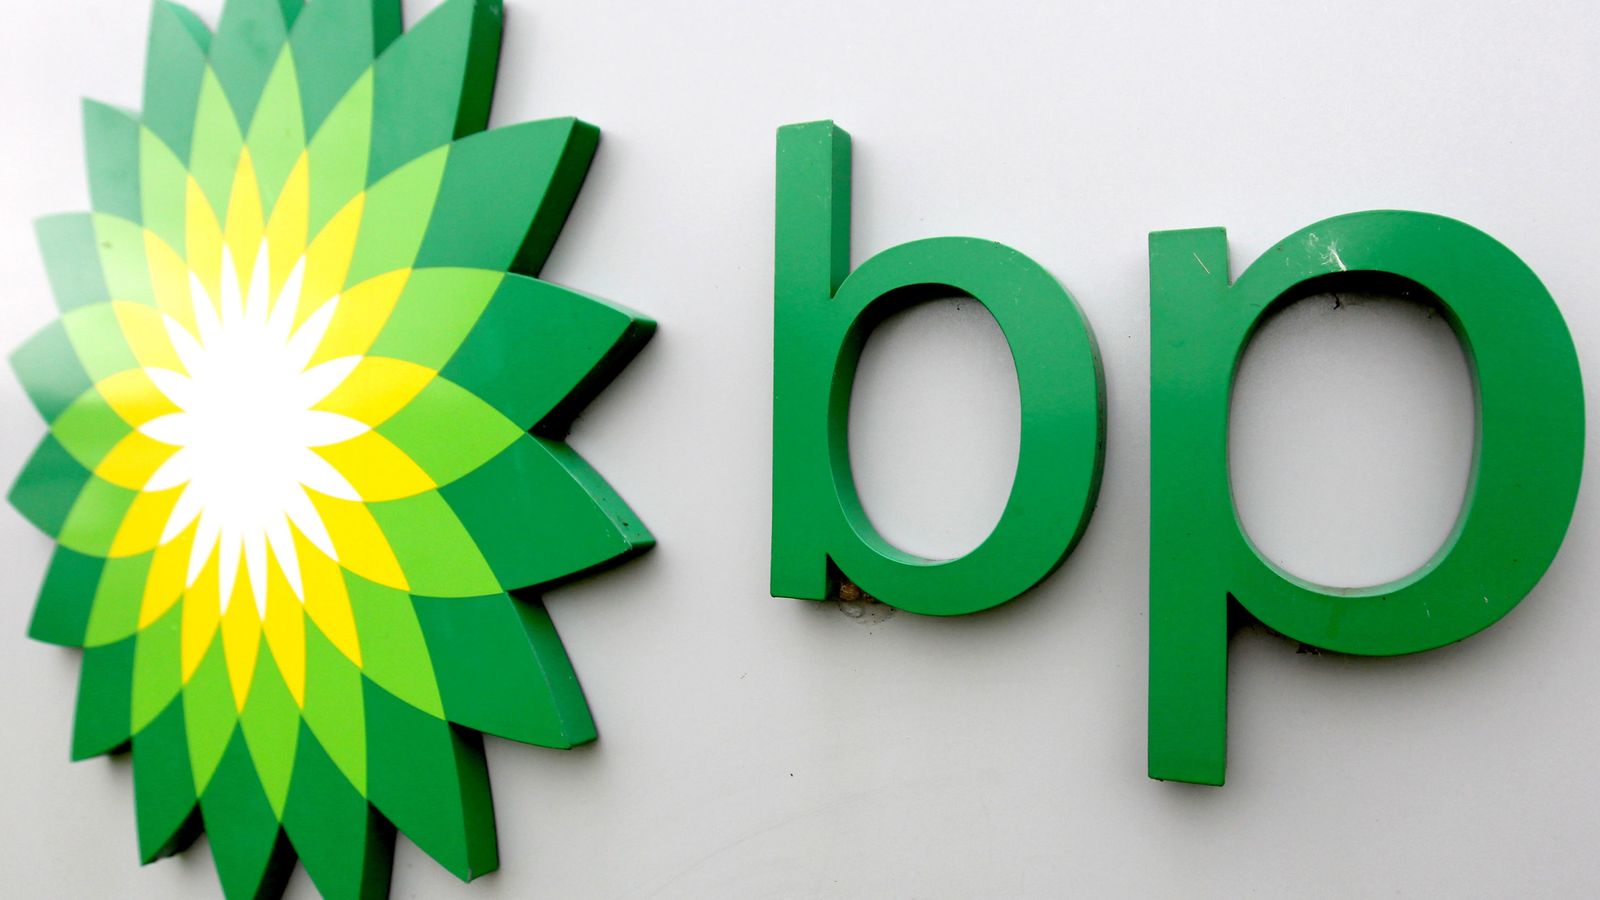 COP26: Away from summit, global demand for oil and gas means BP remains a 'cash machine'